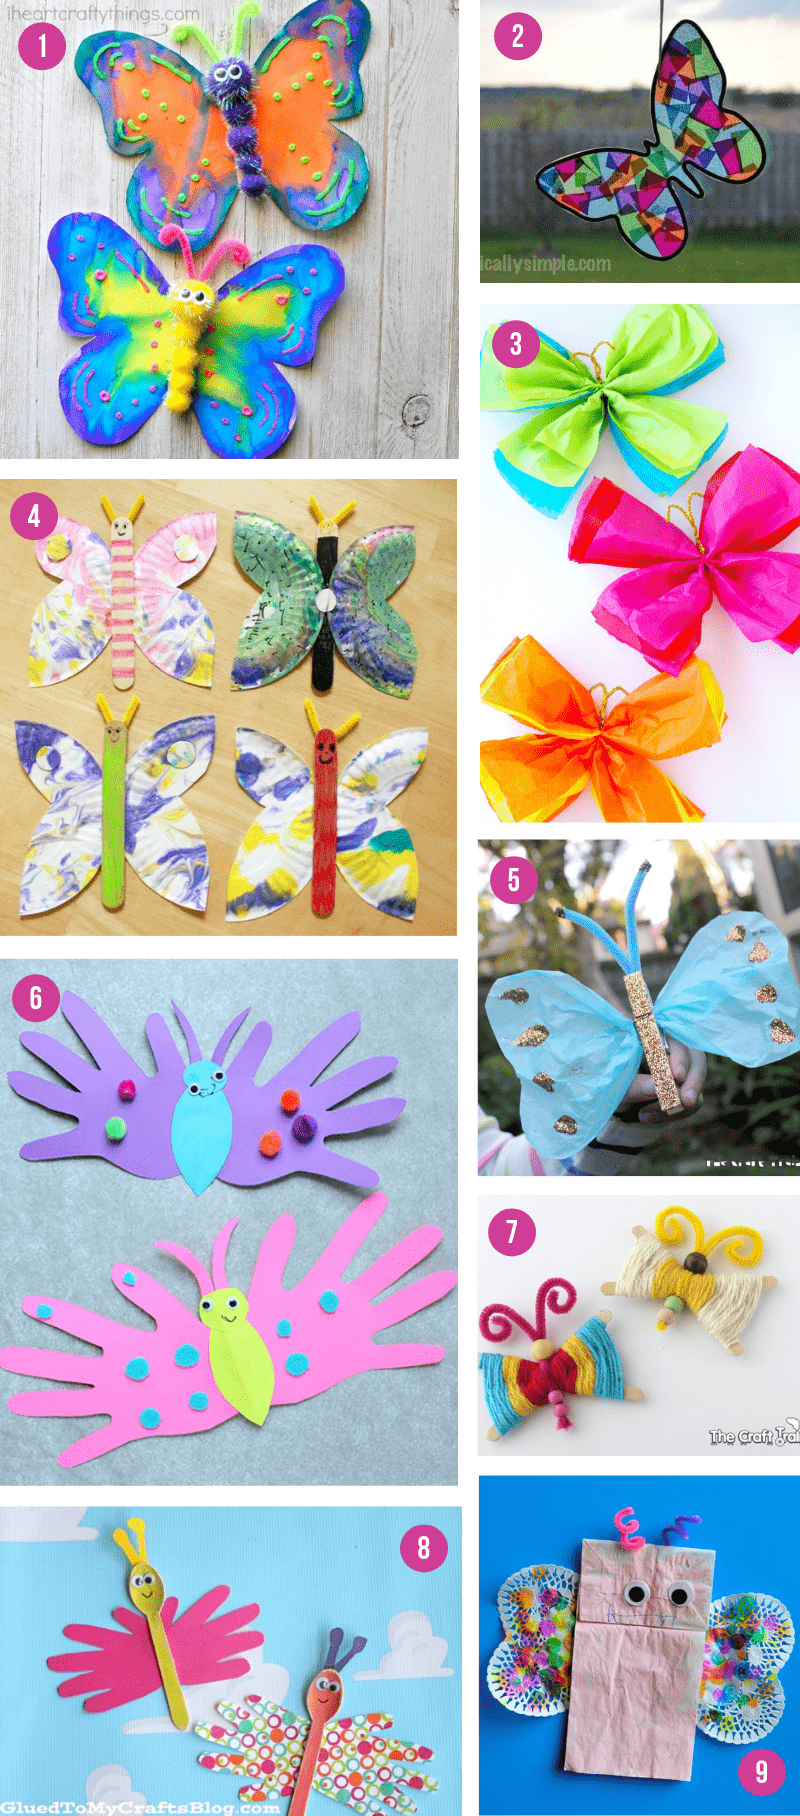 Crafts for 1st & 2nd Grade, Fun Craft Ideas for Kids Ages 6 to 8